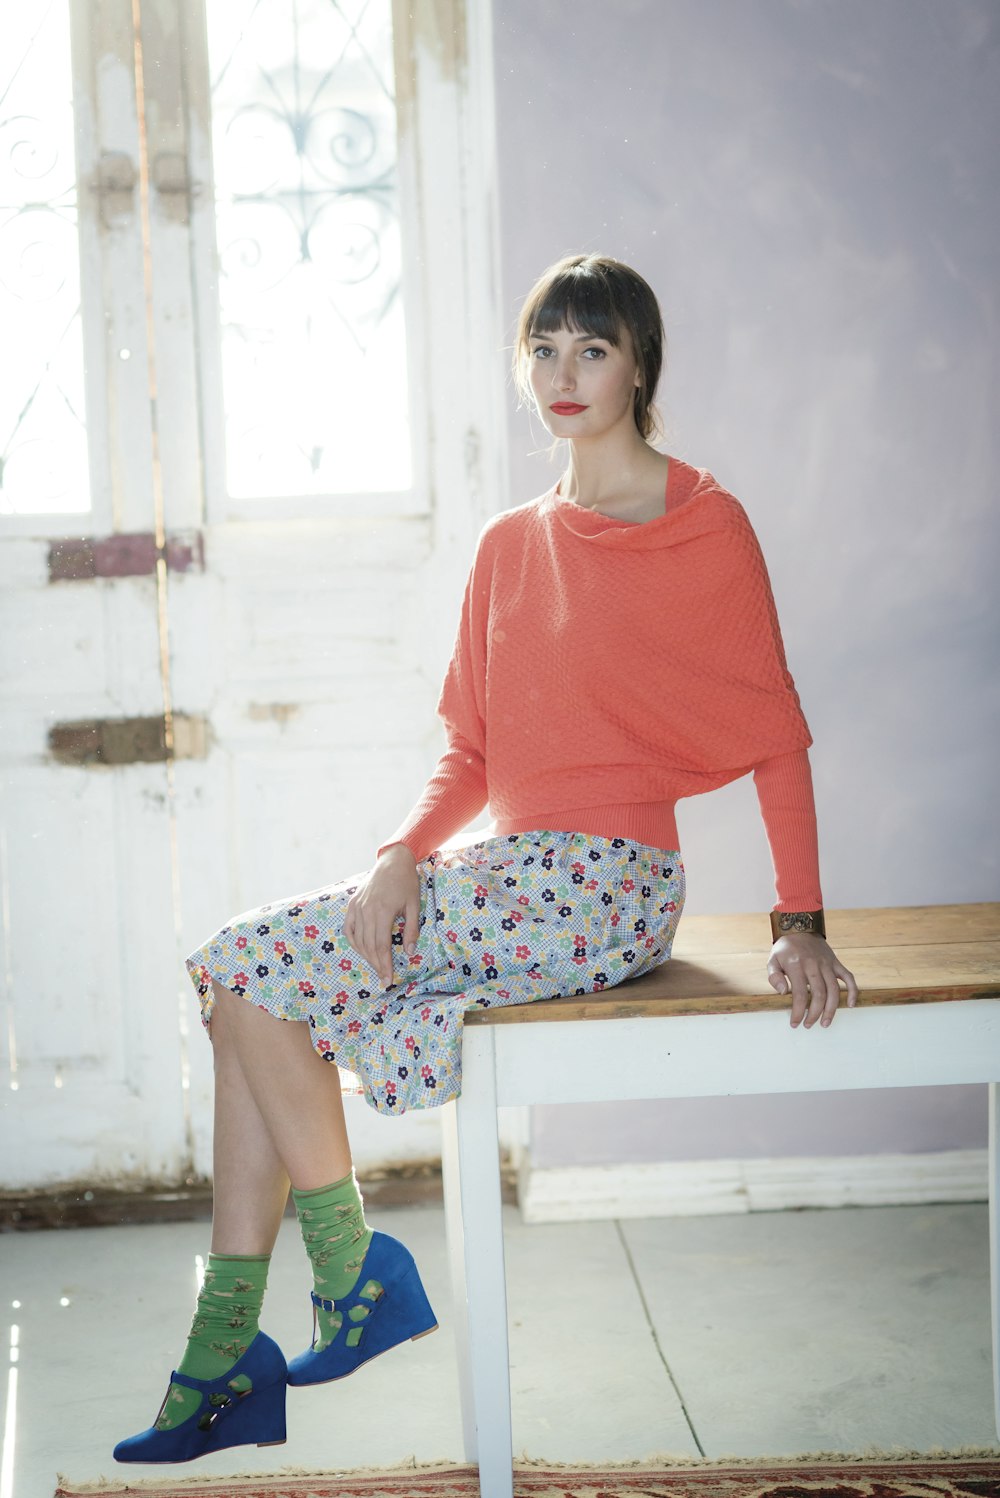 woman orange shirt and floral skirt sitting on table